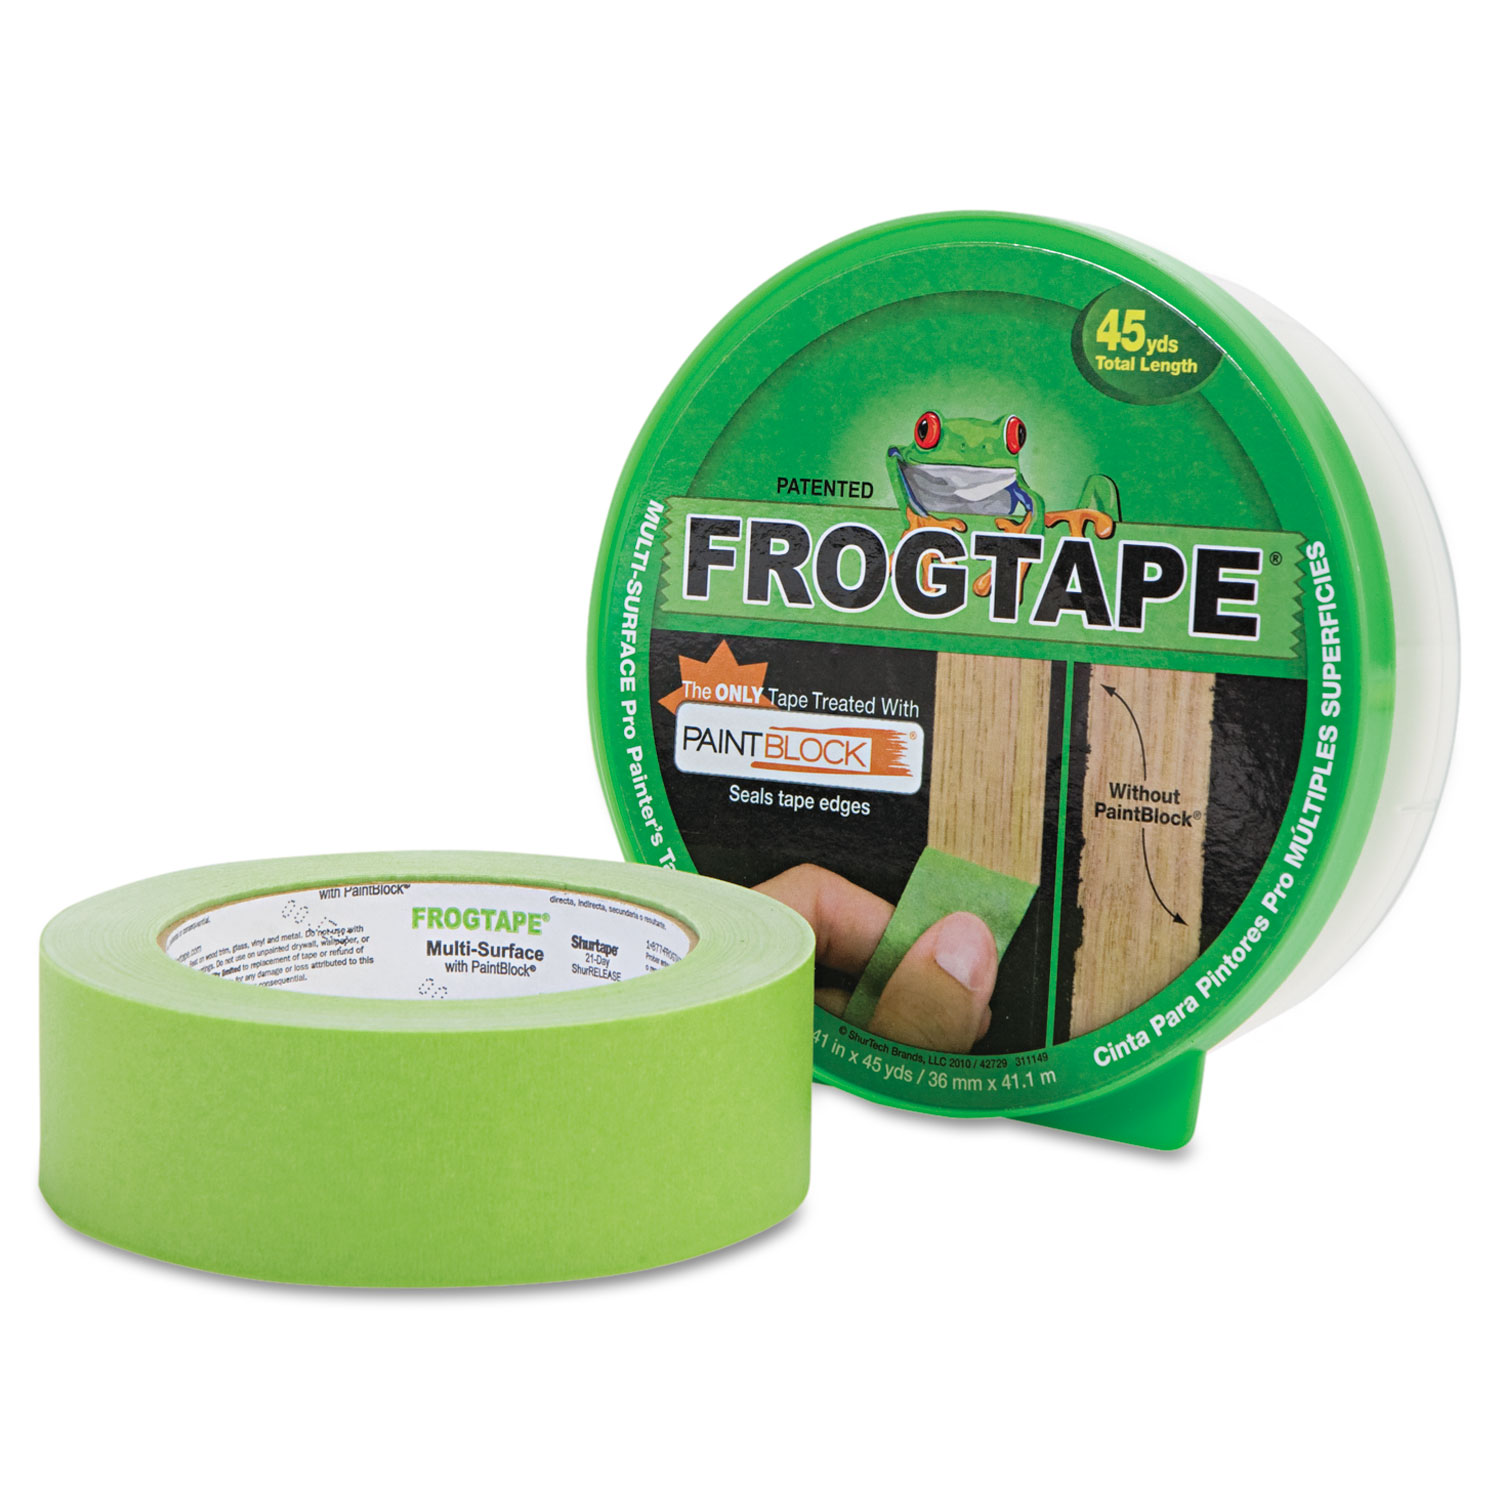 FROGTAPE Painting Tape, 1.41 x 45yds, 3 Core, Green